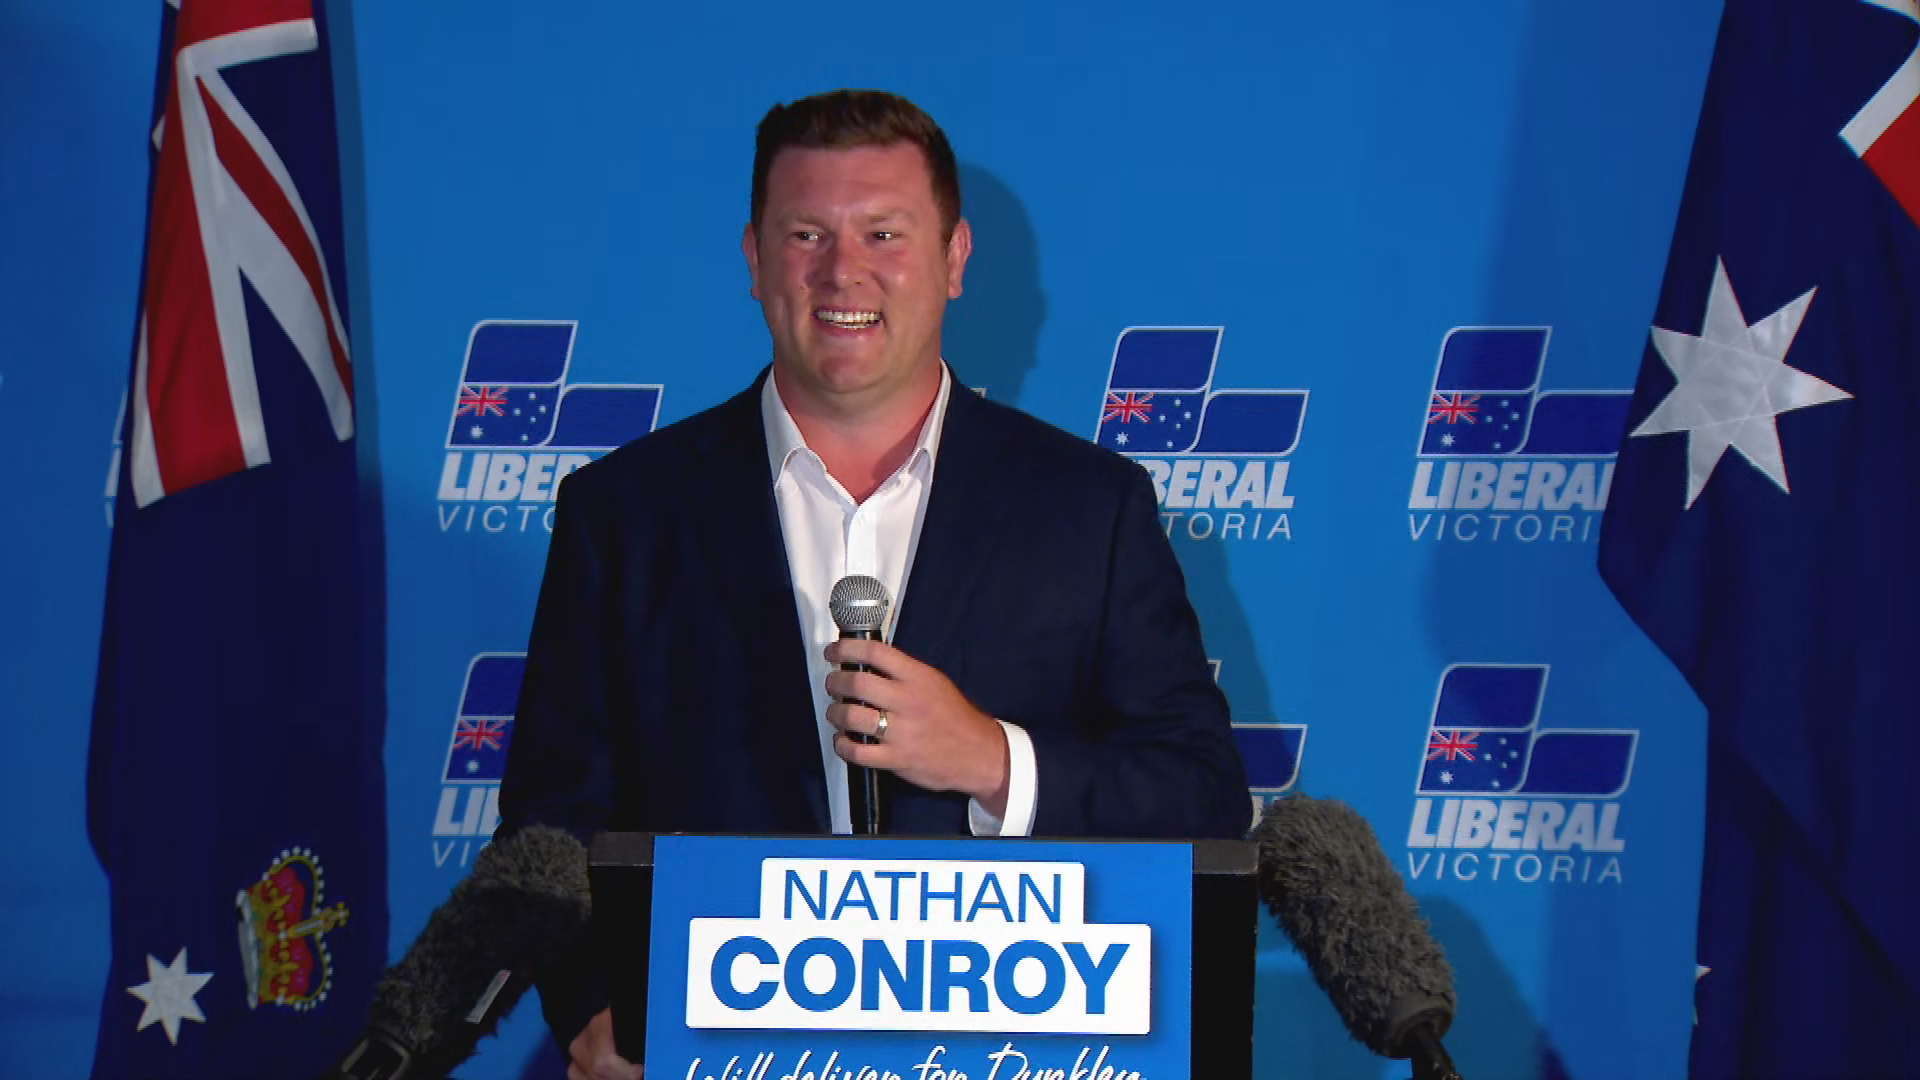 Liberal by-election candidate announces wife's pregnancy during concession speech